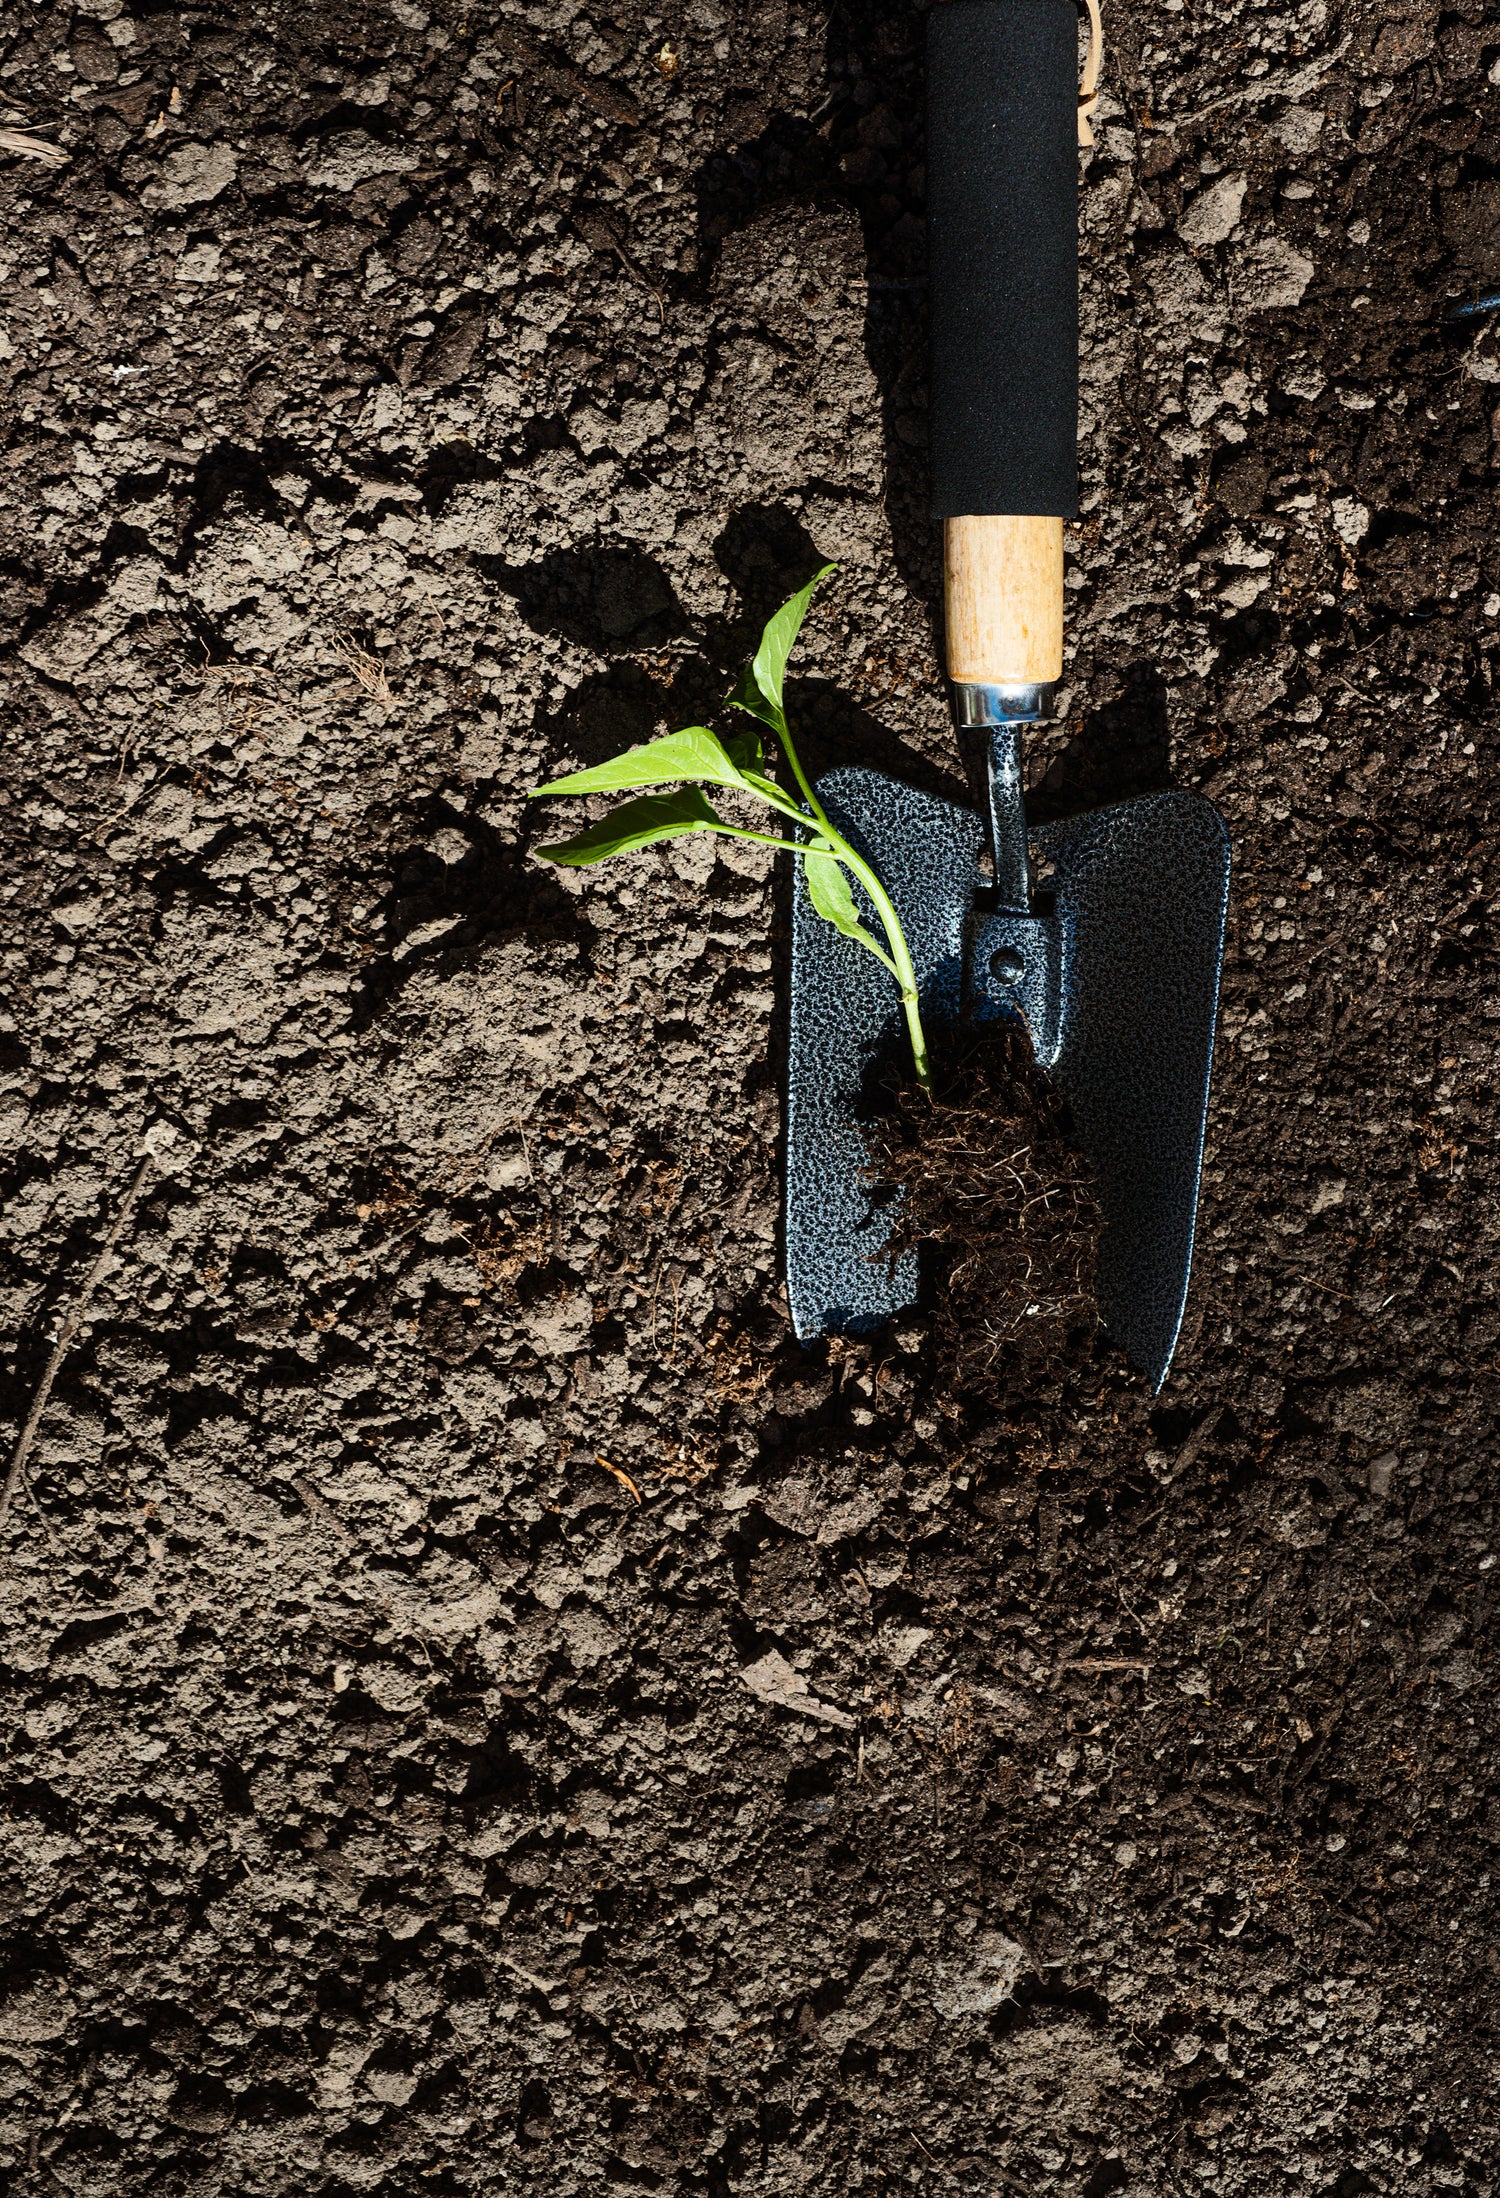 gardening trowel in the soil with a pepper plant in it